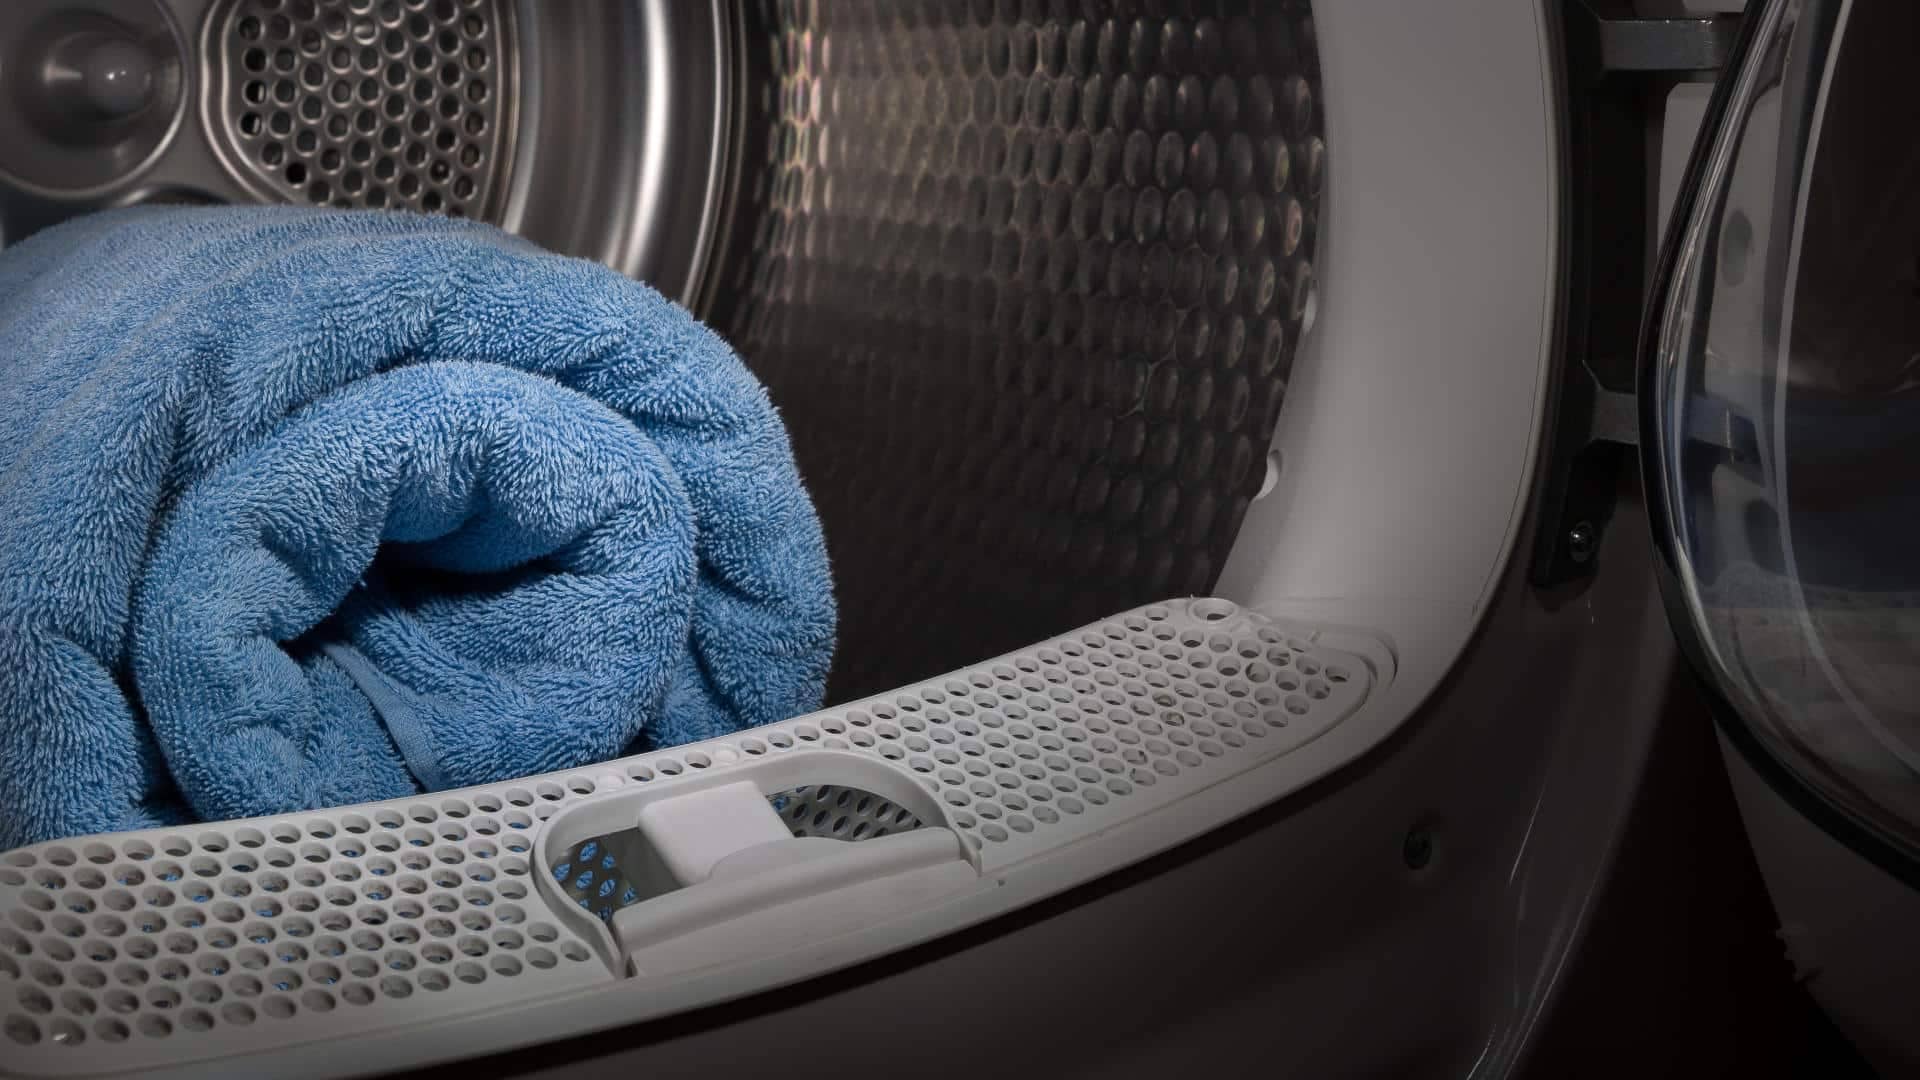 How To Change A Dryer Belt: Step-By-Step-Guide